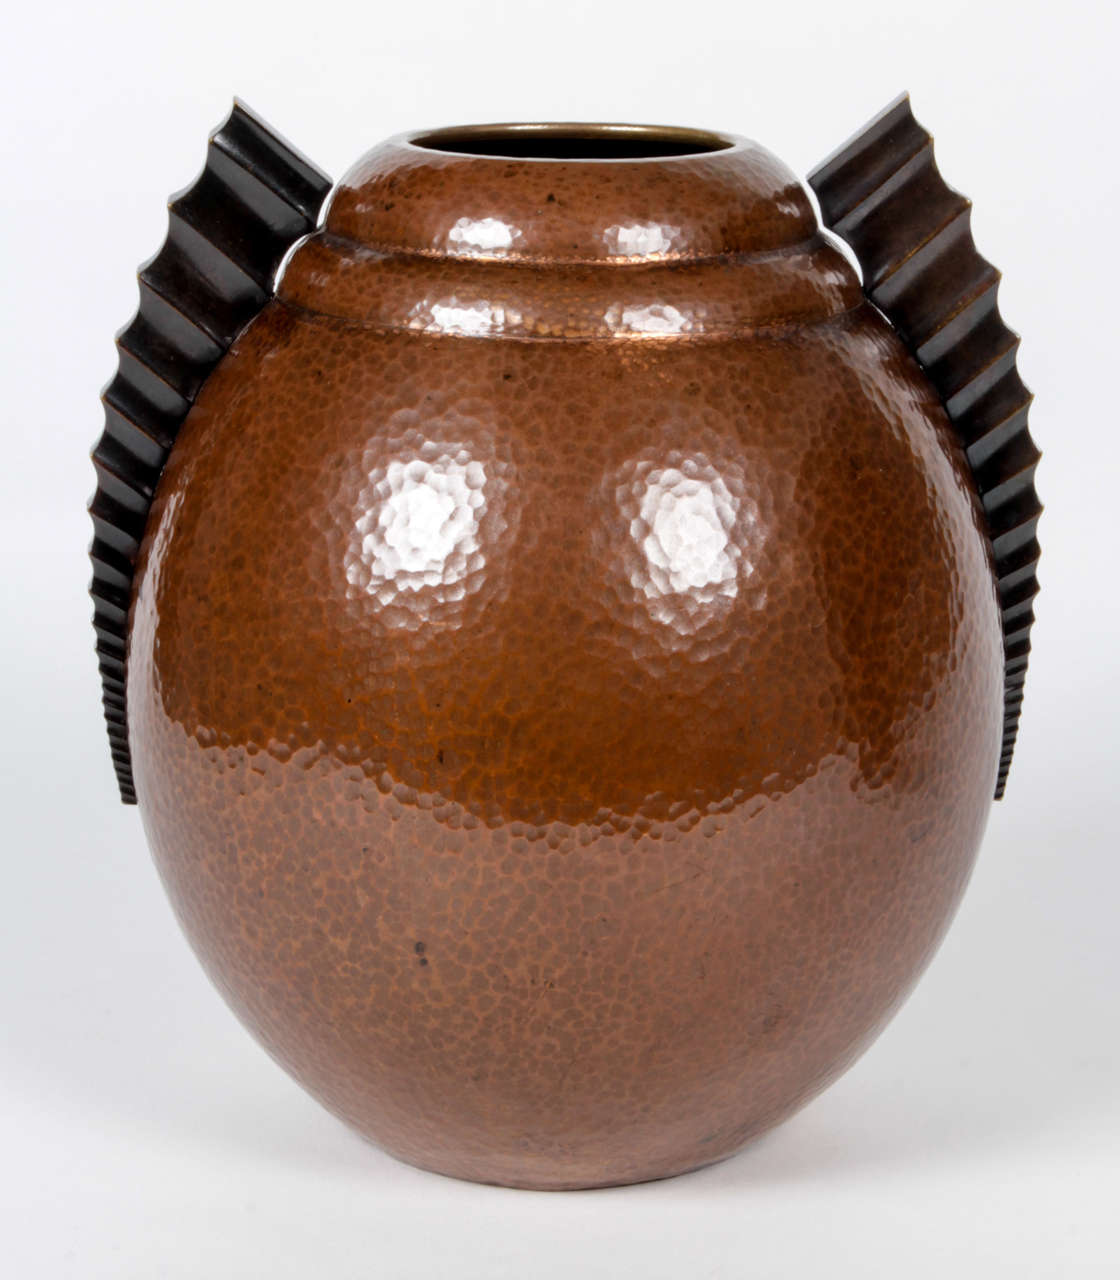 SEVARD  France (active 1920's/1930's)

Dinanderie vase  with fish fins c. 1925

Hand wrought and hand hammered copper with a rich chocolate-brown 
patination and bronze fin-like handles, gilt detailing

Marks:  Sevard (inscribed signature),